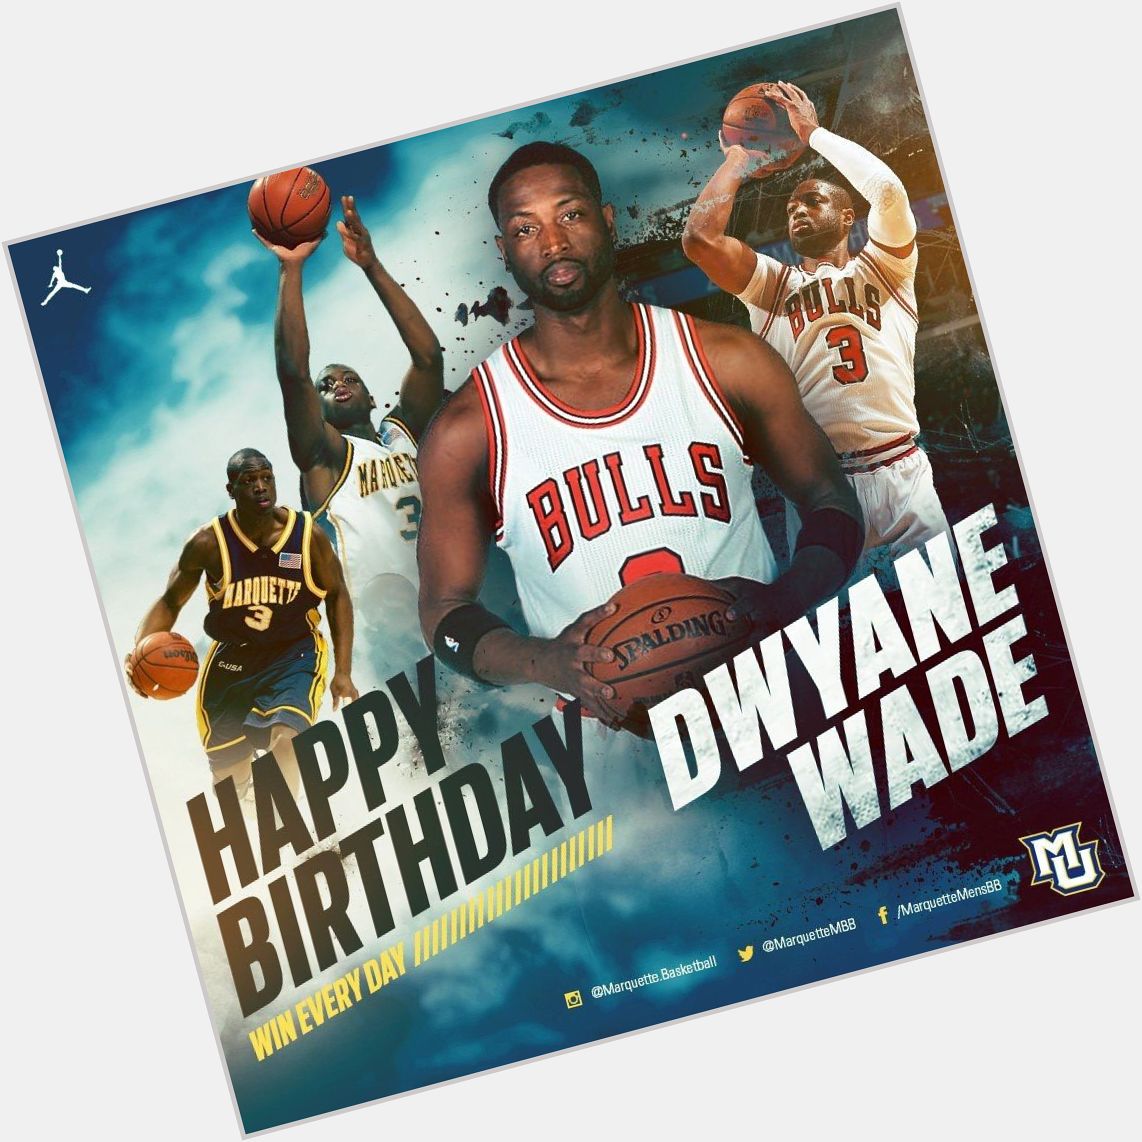 Happy Birthday Dwyane Wade! Lets get a W for his birthday tonight.  